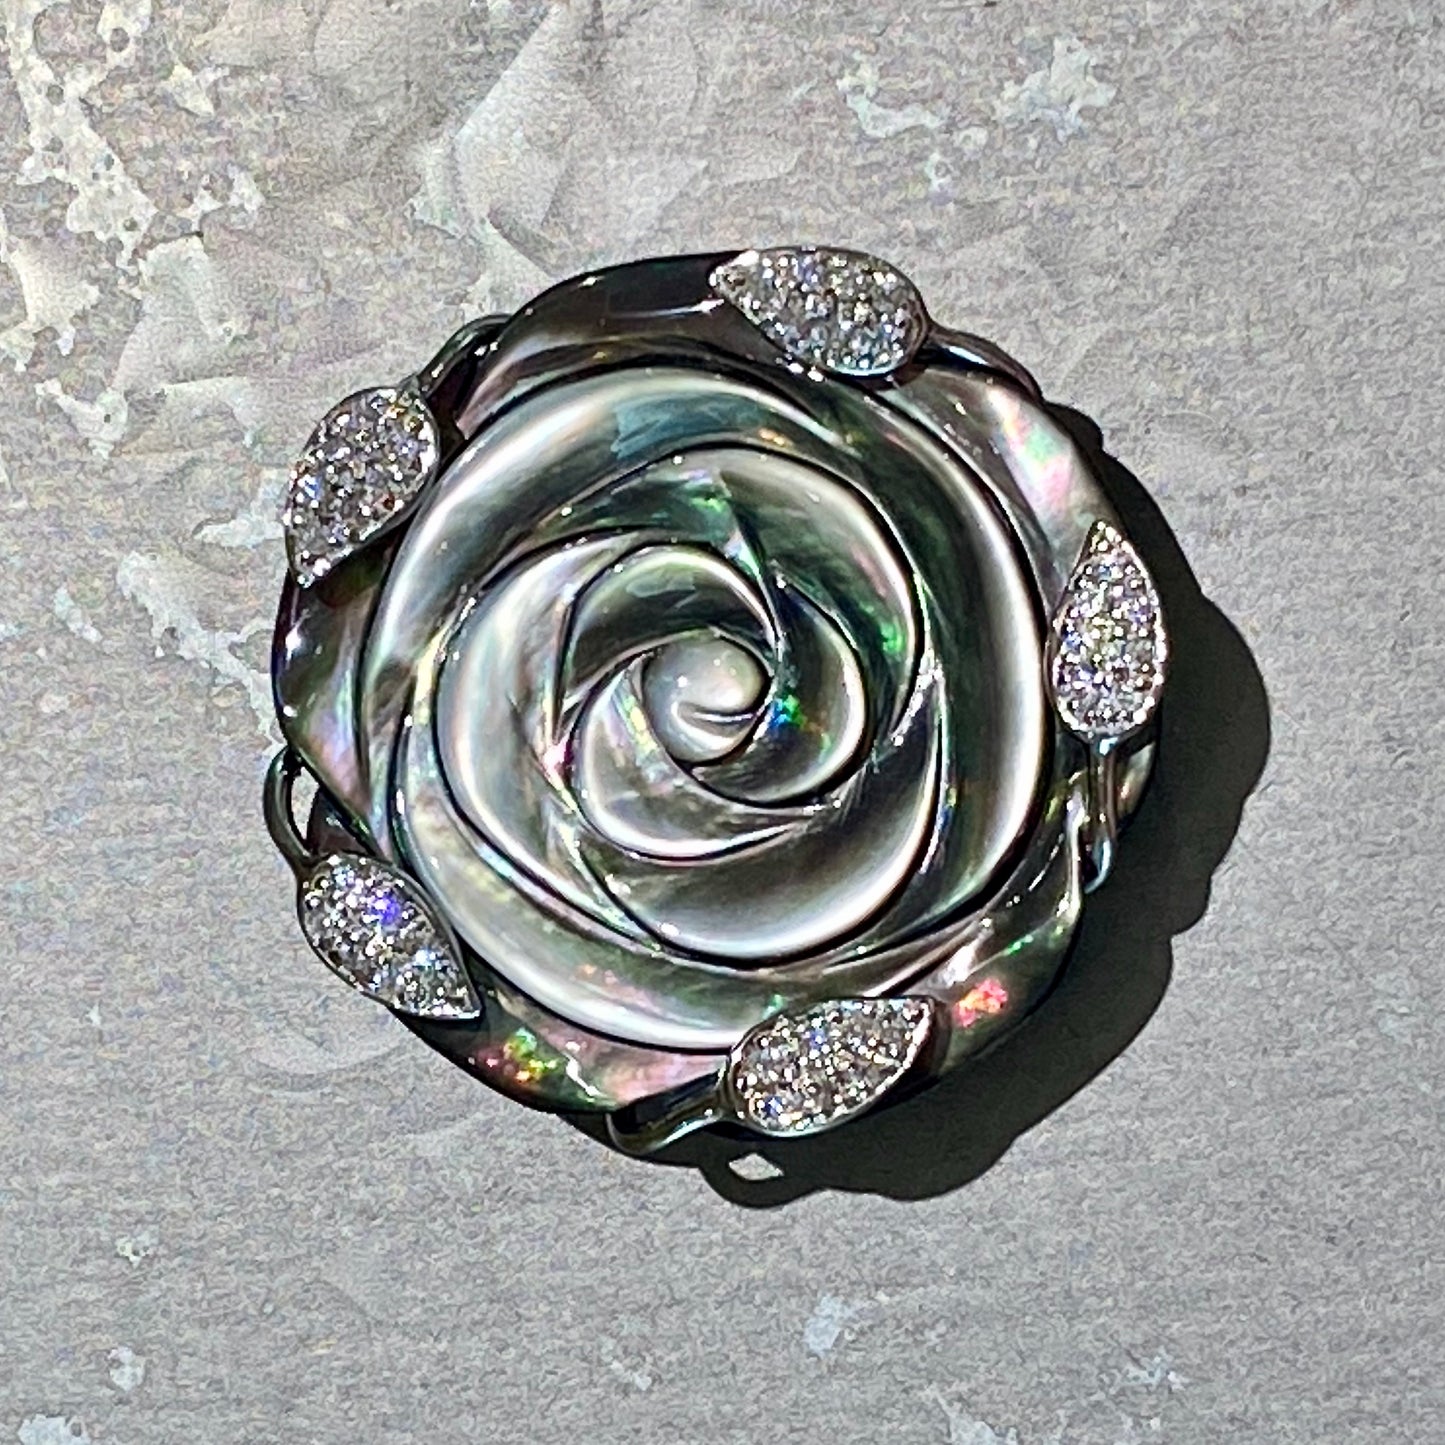 Natural Black Mother of Pearl Blooming Rose Pendant/Brooch with CZ-studded Leaves in Rhodium-Plated Sterling Silver (18" twisted black satin necklace cord included).